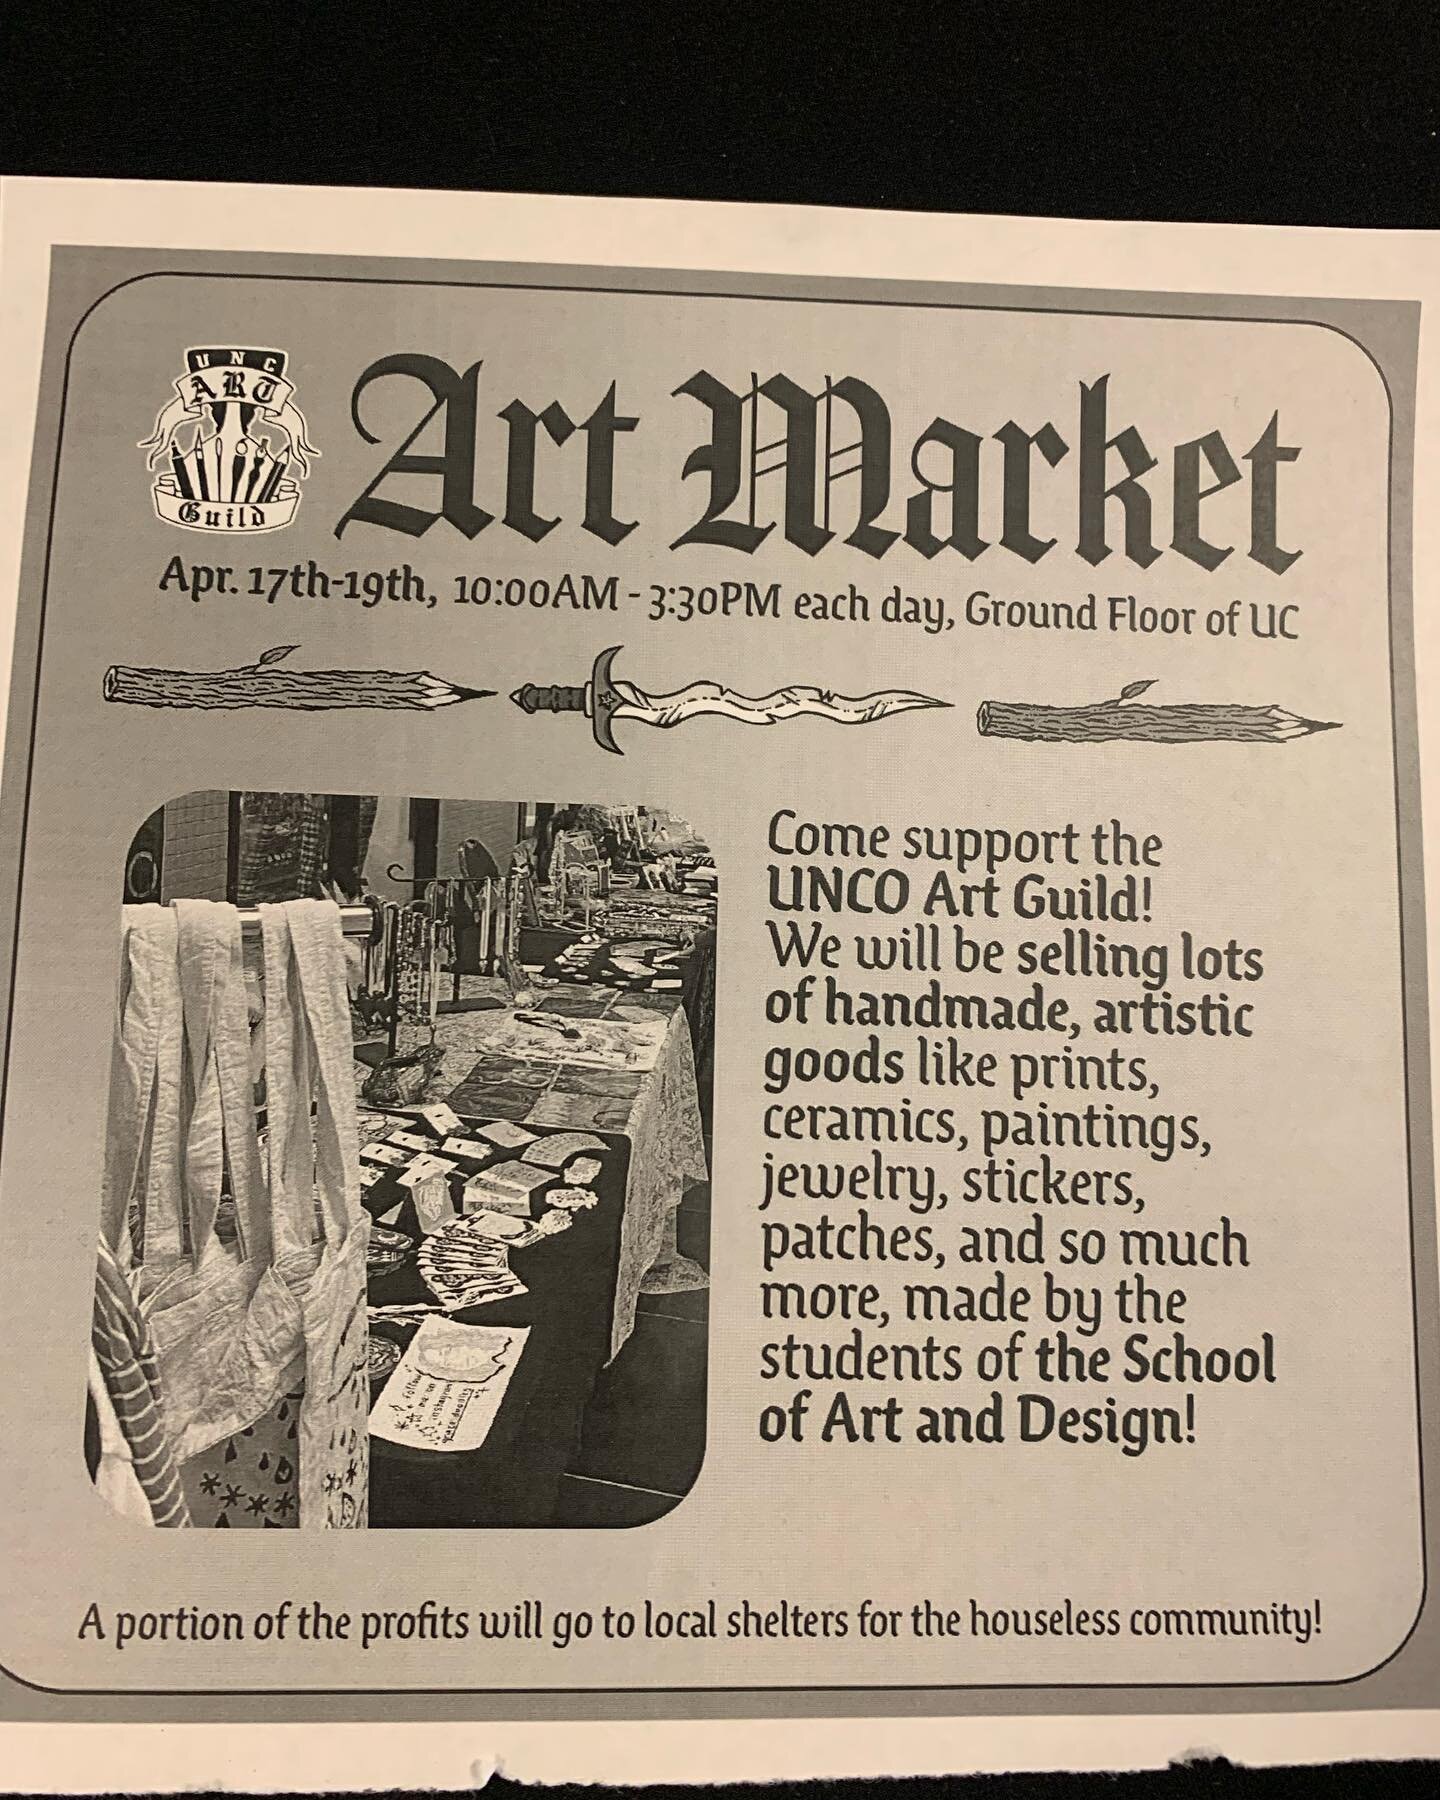 The art guild is selling some wonderful things! Check it out. #craft #unc